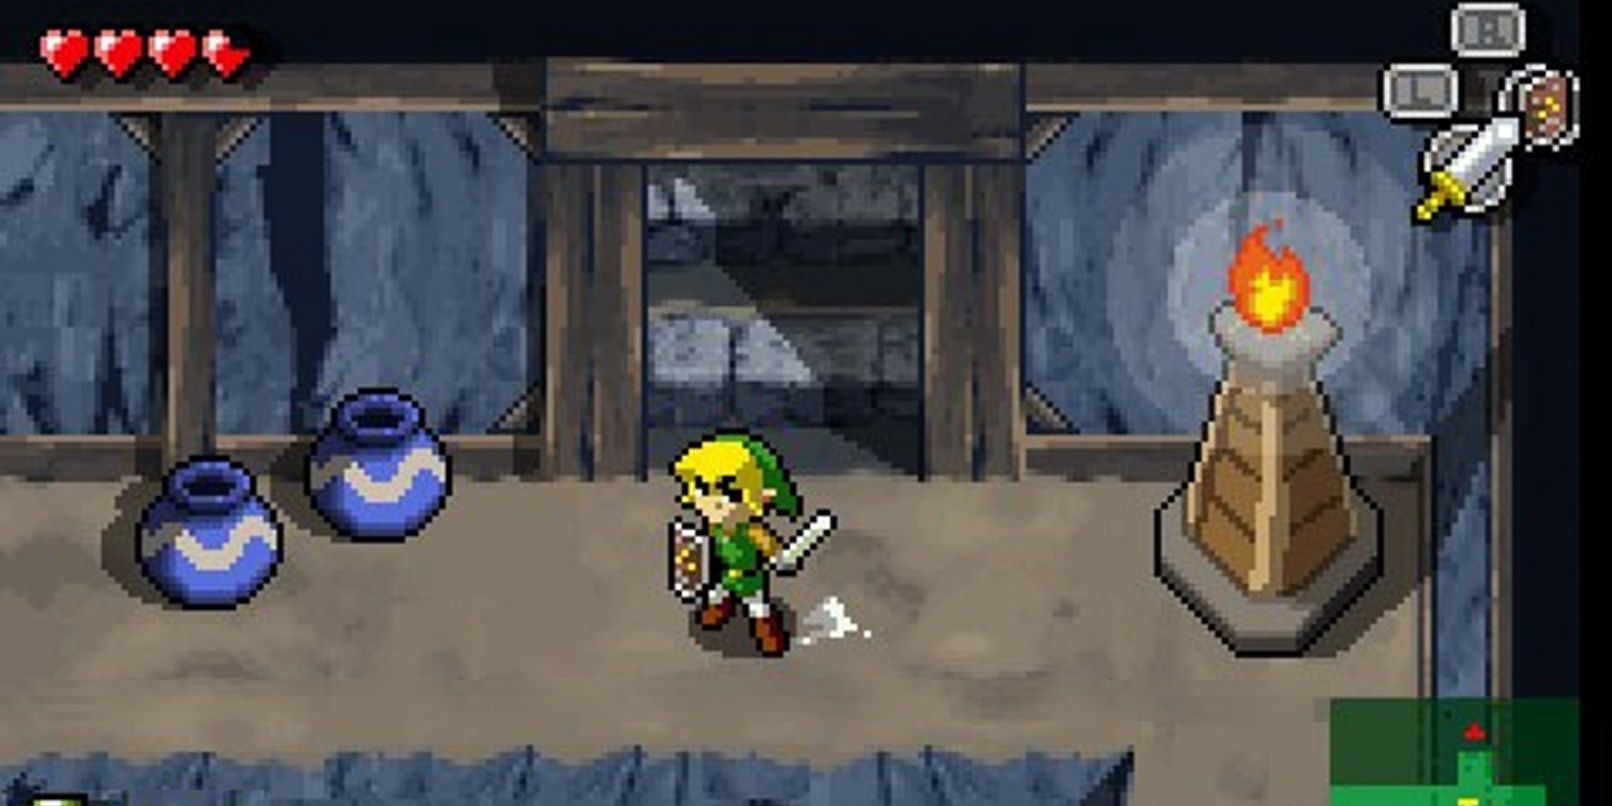 Link wields his shield and sword in a dungeon.